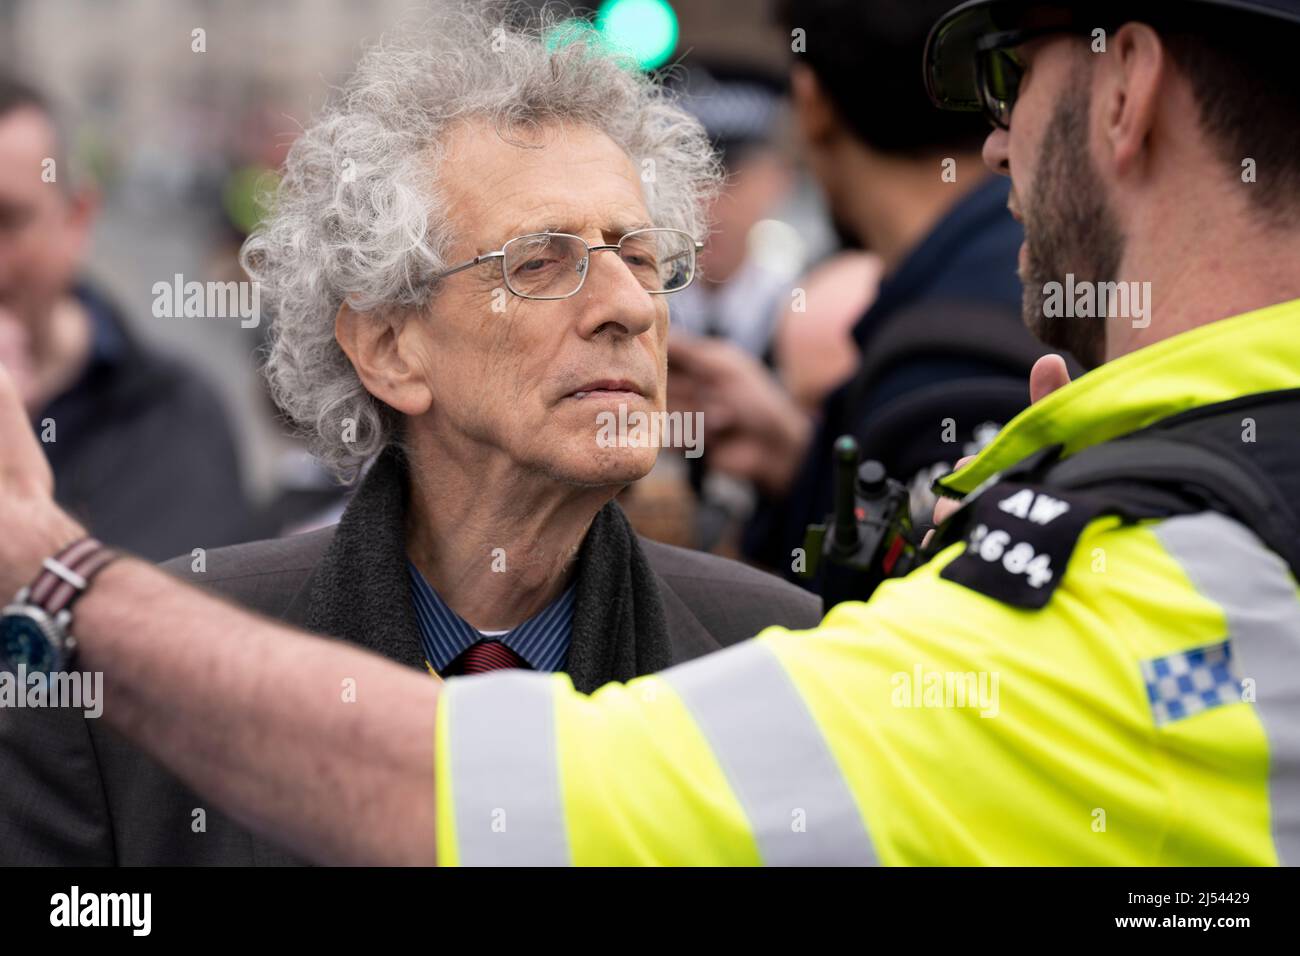 As Prime Minister Boris Johnson was due to apologise to parliament about his fixed-penalty fine for being present at a party during his own Covid pandemic restrictions, Piers Corbyn and anti-vaxx freedom of speech protesters block the gates of parliament during an altercation with Tory MP Bob Blackman, on 19th April 2022, in London, England. The Met police continue to investigate Johnson and his staff as news of more lockdown party fines are expected to be revealed by police. Stock Photo